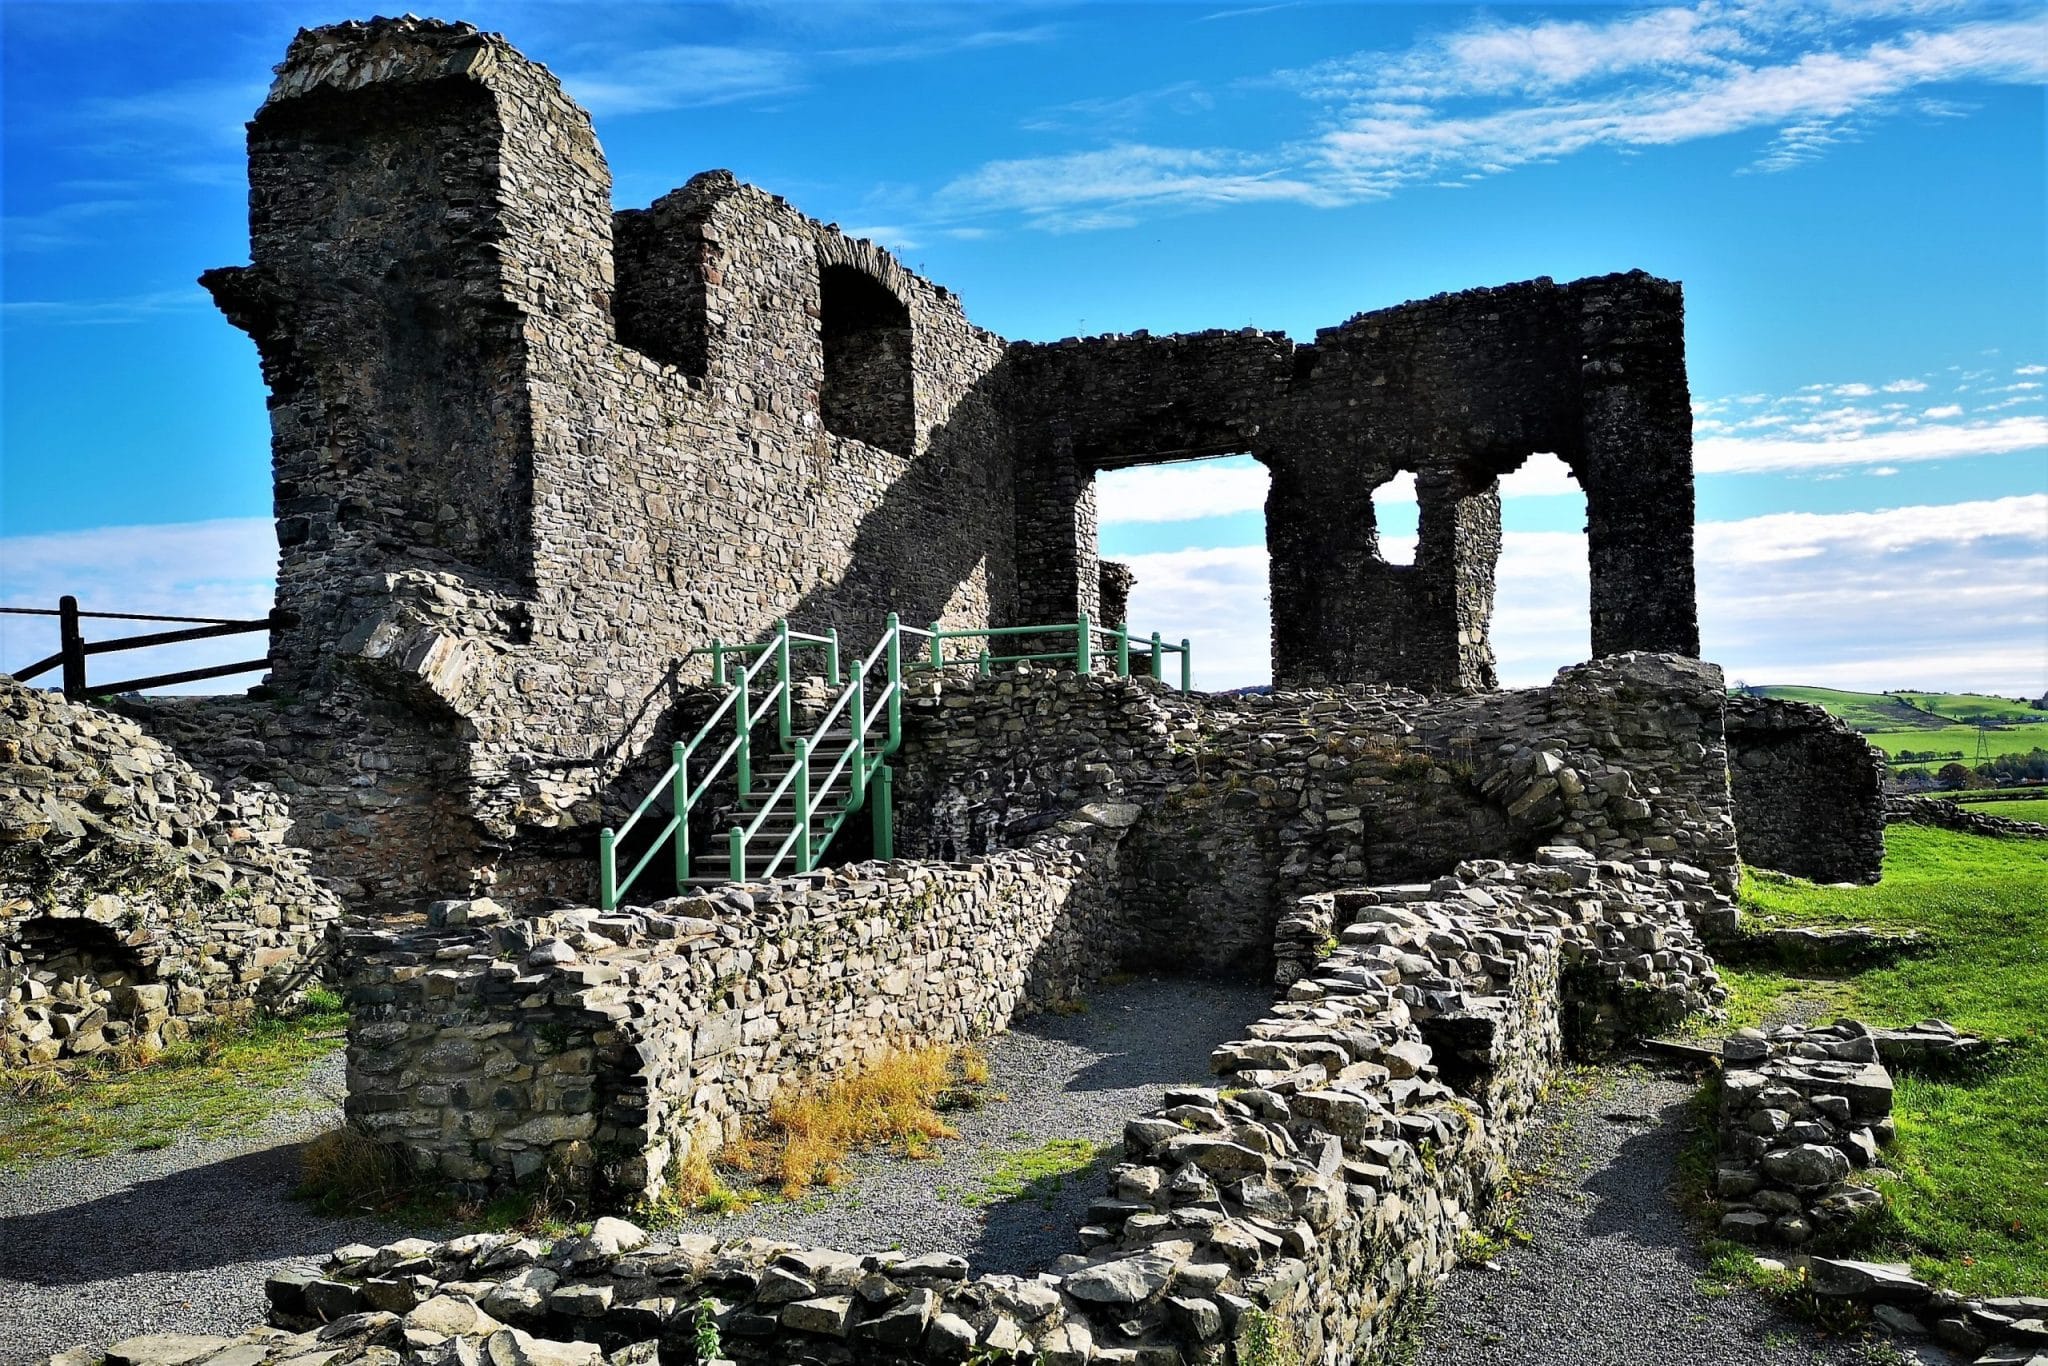 An Exterior View Of The Ruins Of A Medieval Castle In The Lakela